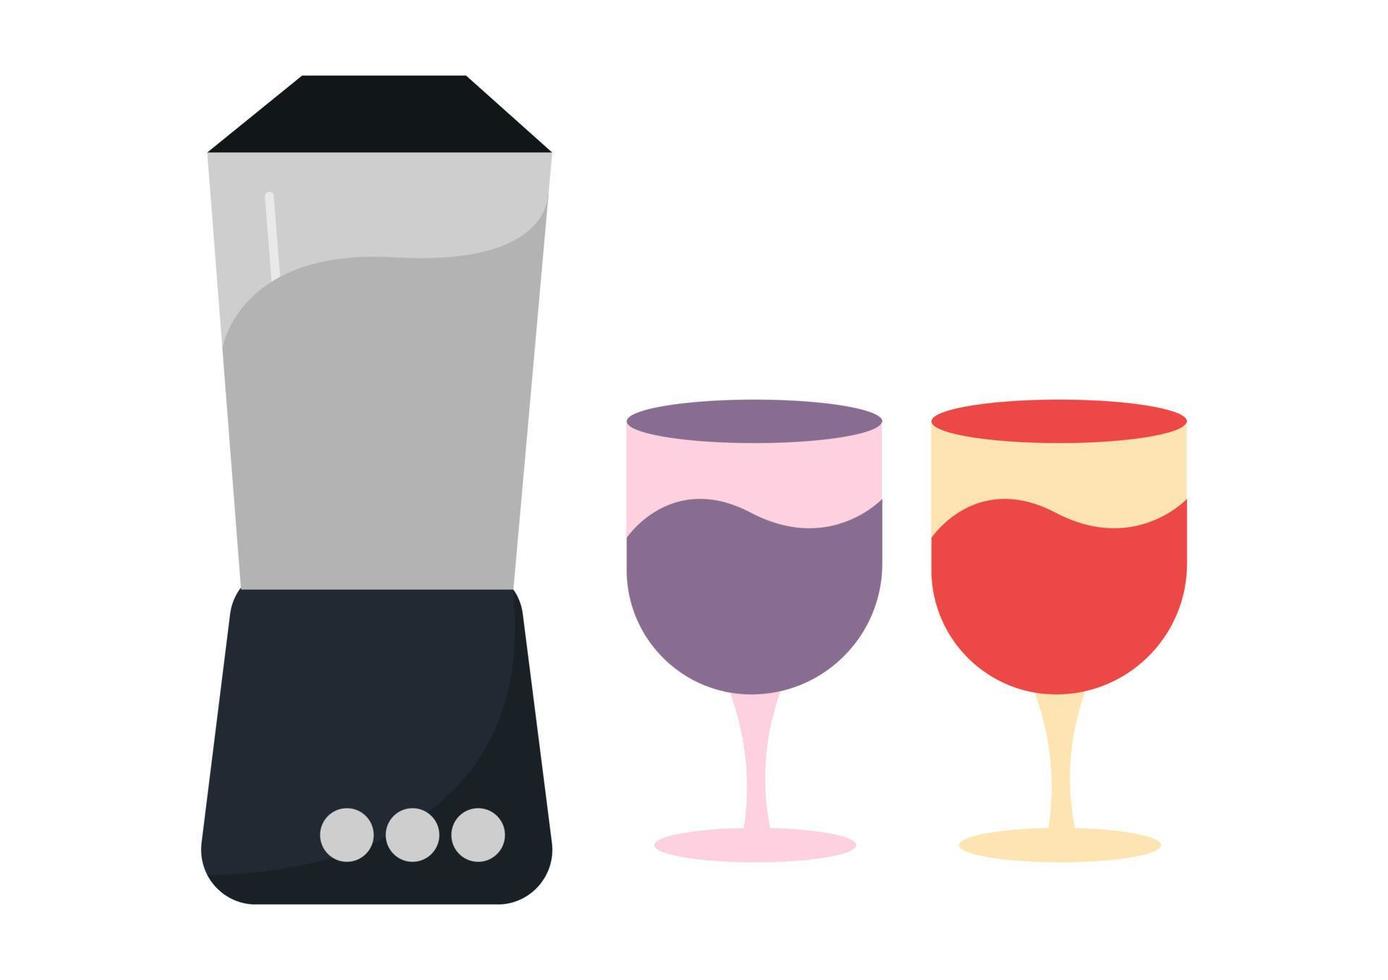 illustration of a blender and two glasses vector